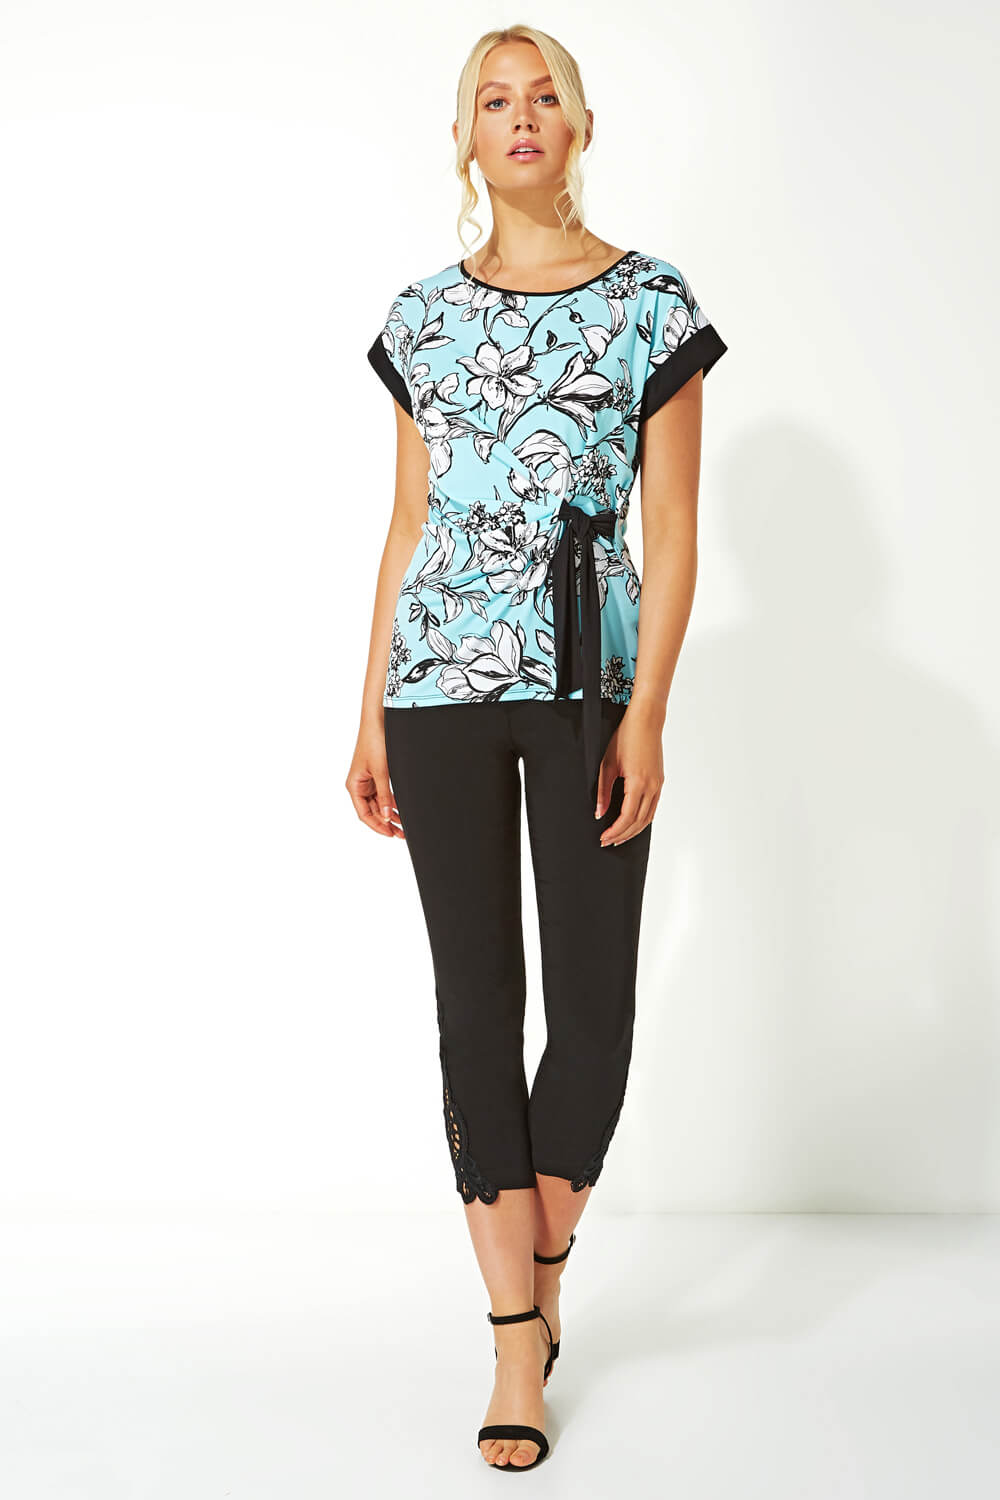 Turquoise Tie Waist Floral Top, Image 3 of 5